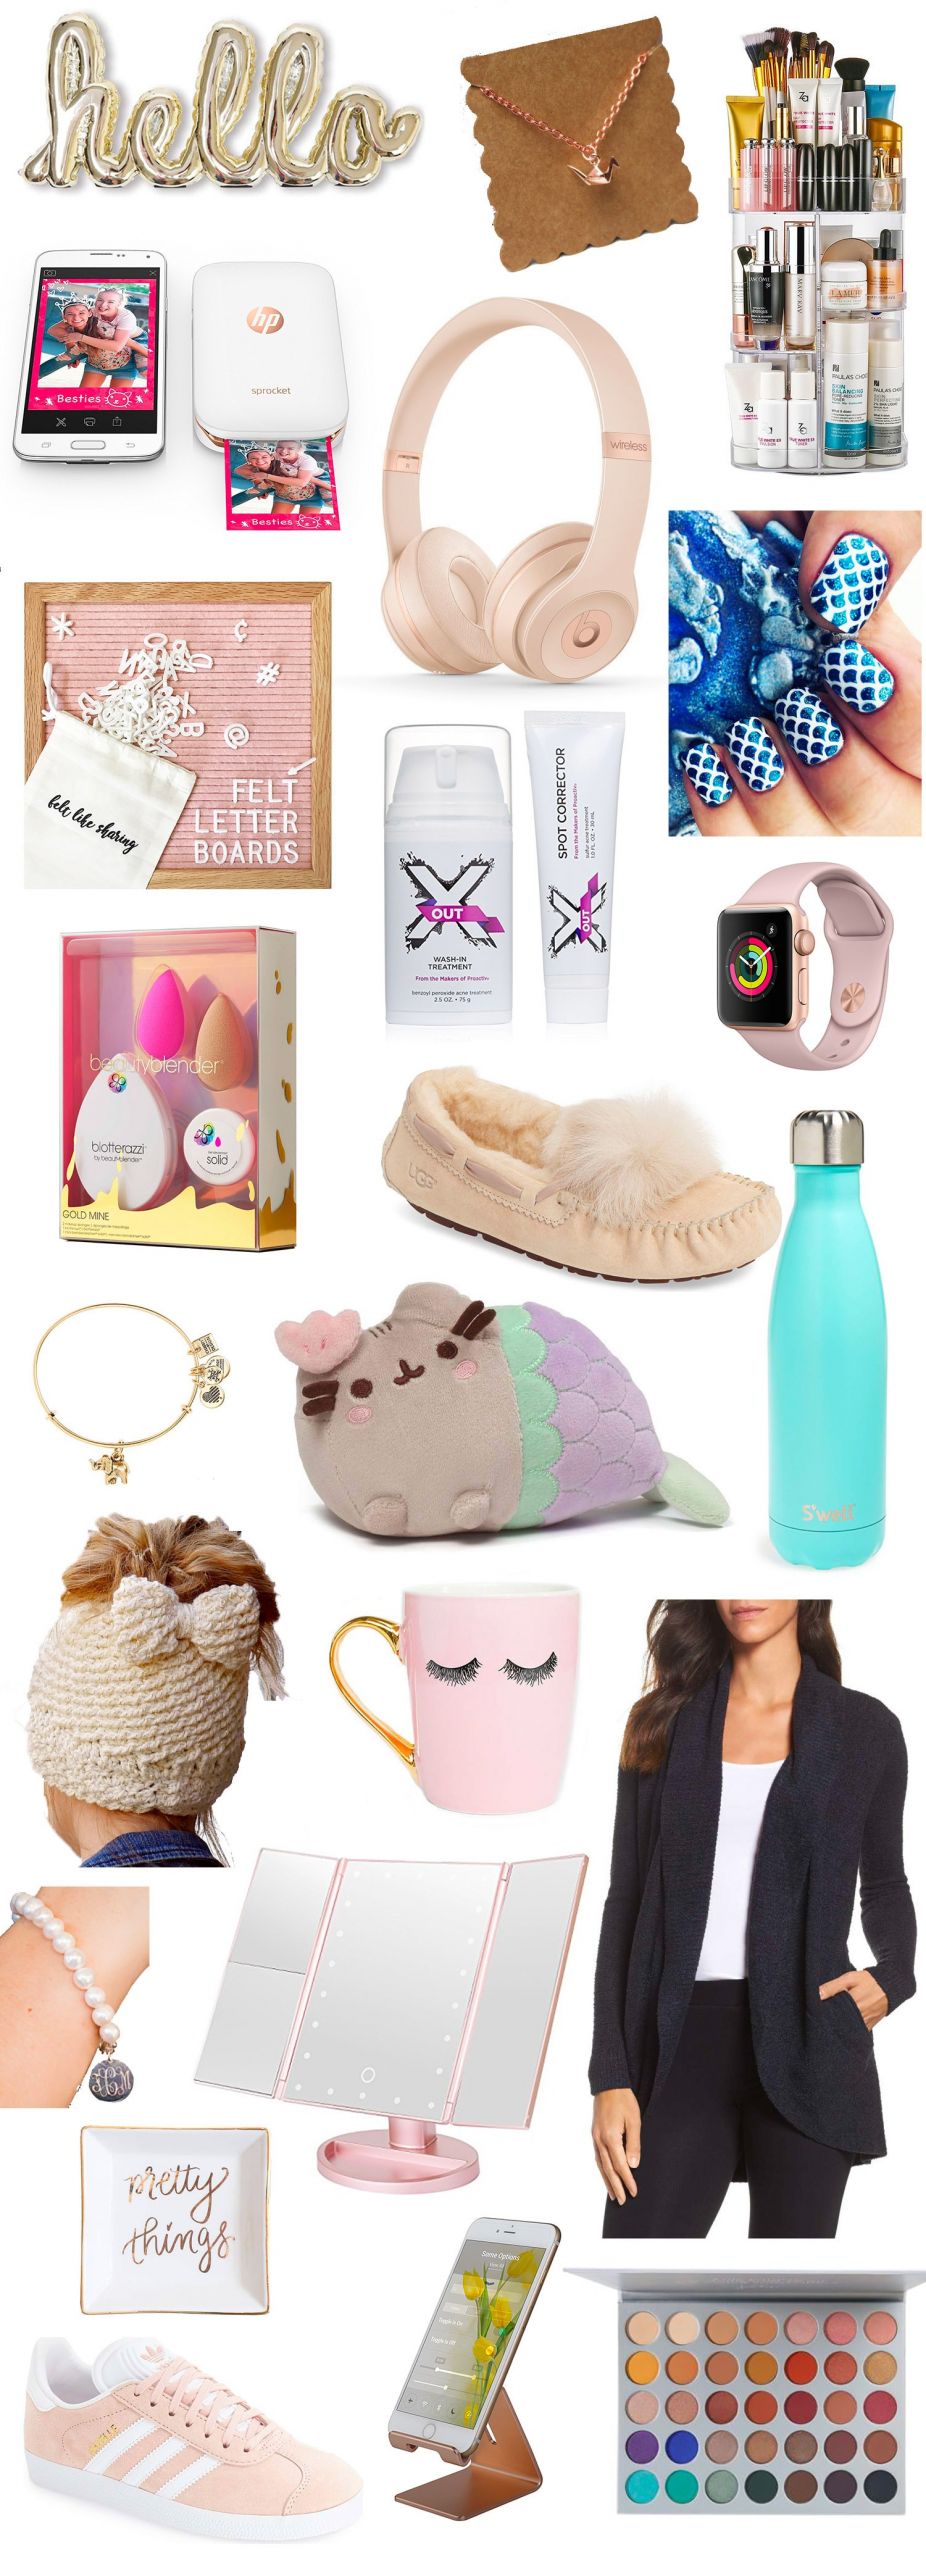 Christmas Gift Ideas For Young Girls
 Top Gifts for Teens This Christmas